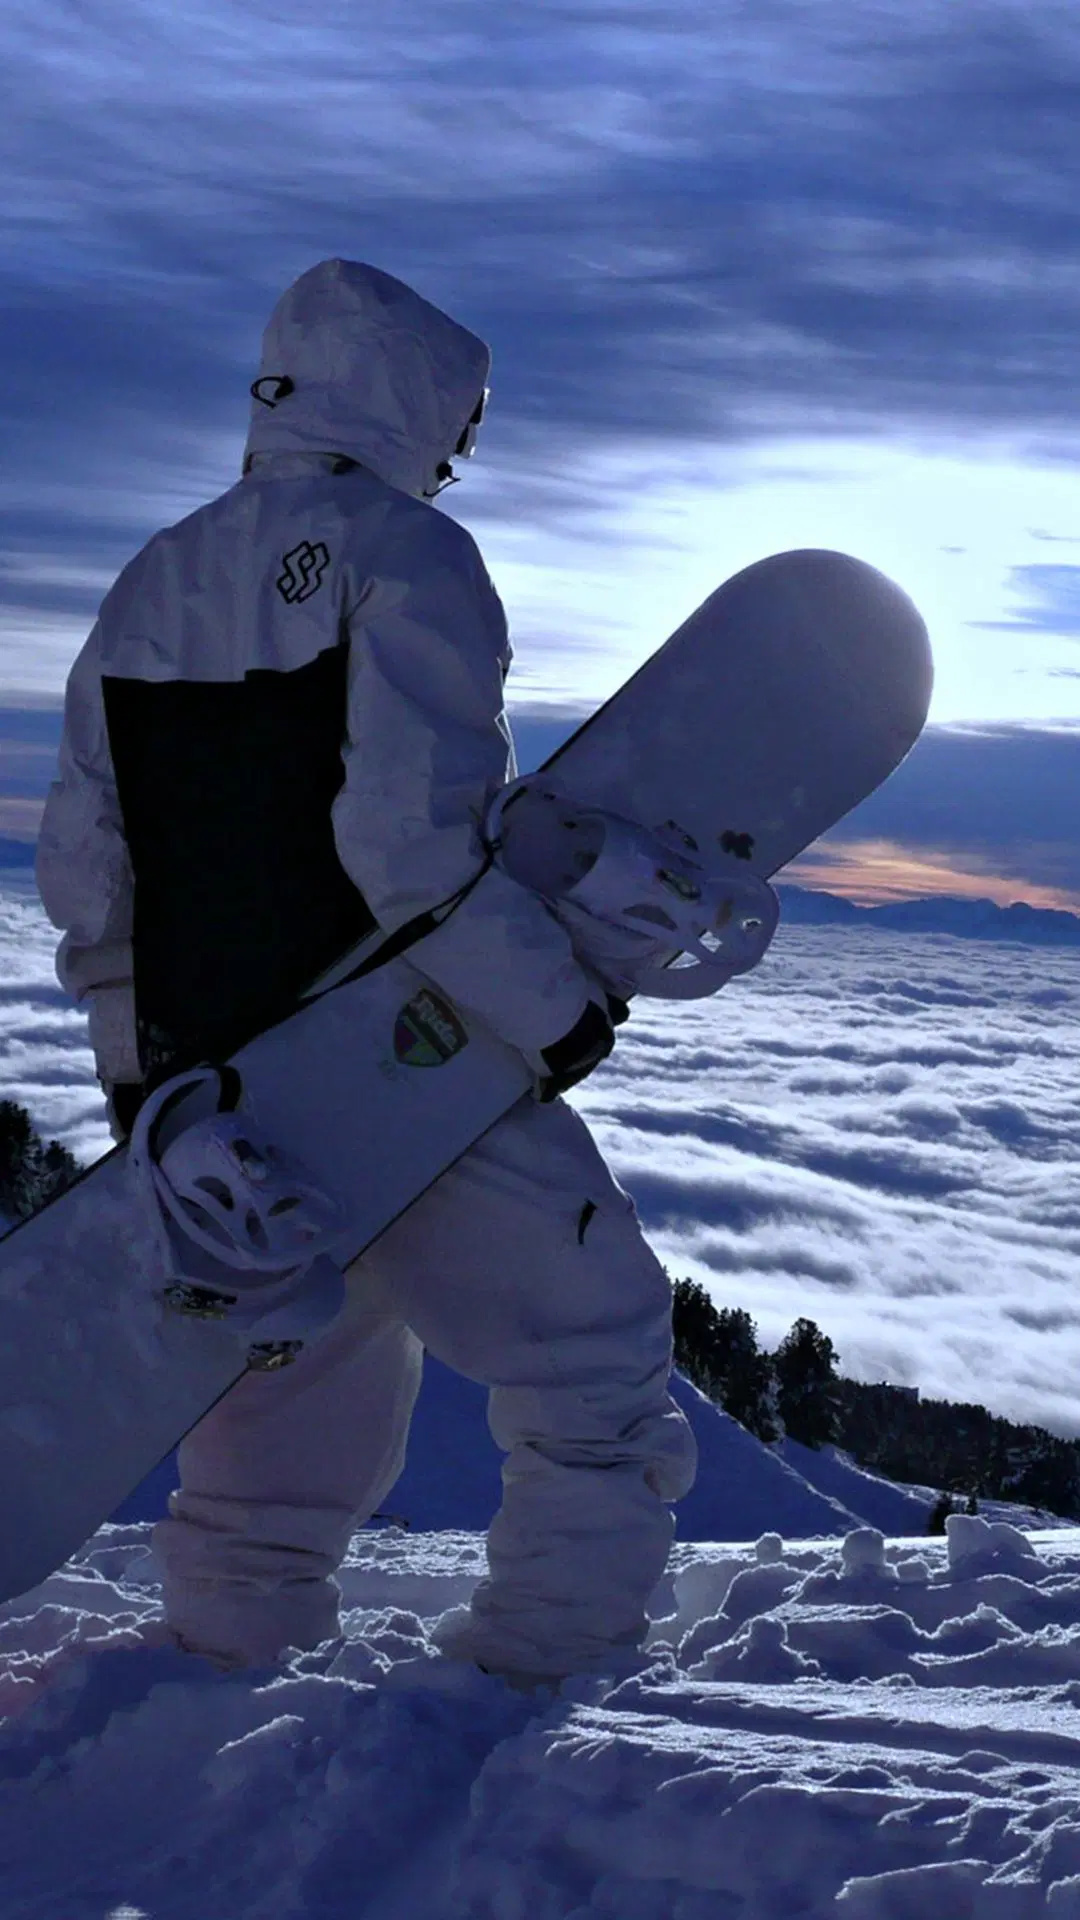 Snowboarding: Alpine style snowboard riding, Extreme competitive sport, Official Olympics sport. 1080x1920 Full HD Background.